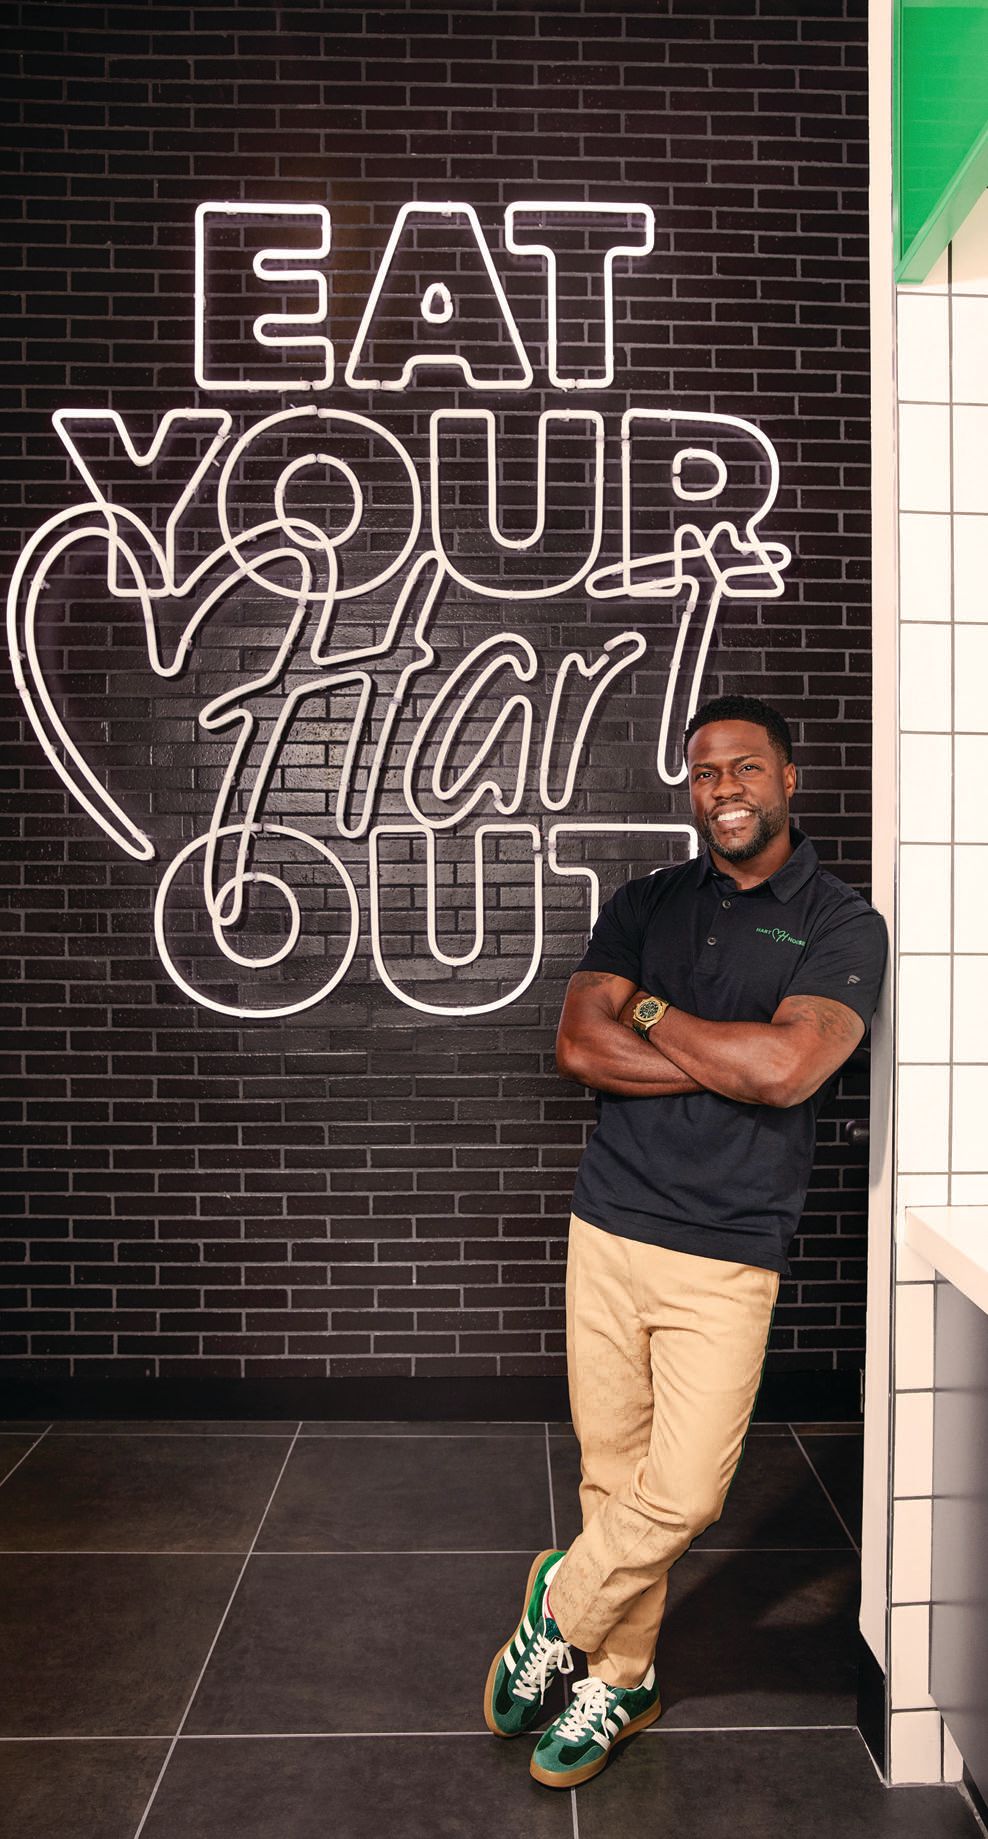 Multi-hyphenate Kevin Hart recently opened Hart House, his plant-based quickservice restaurant concept, and has plans for more locations across Southern California PHOTO COURTESY OF HART HOUSE